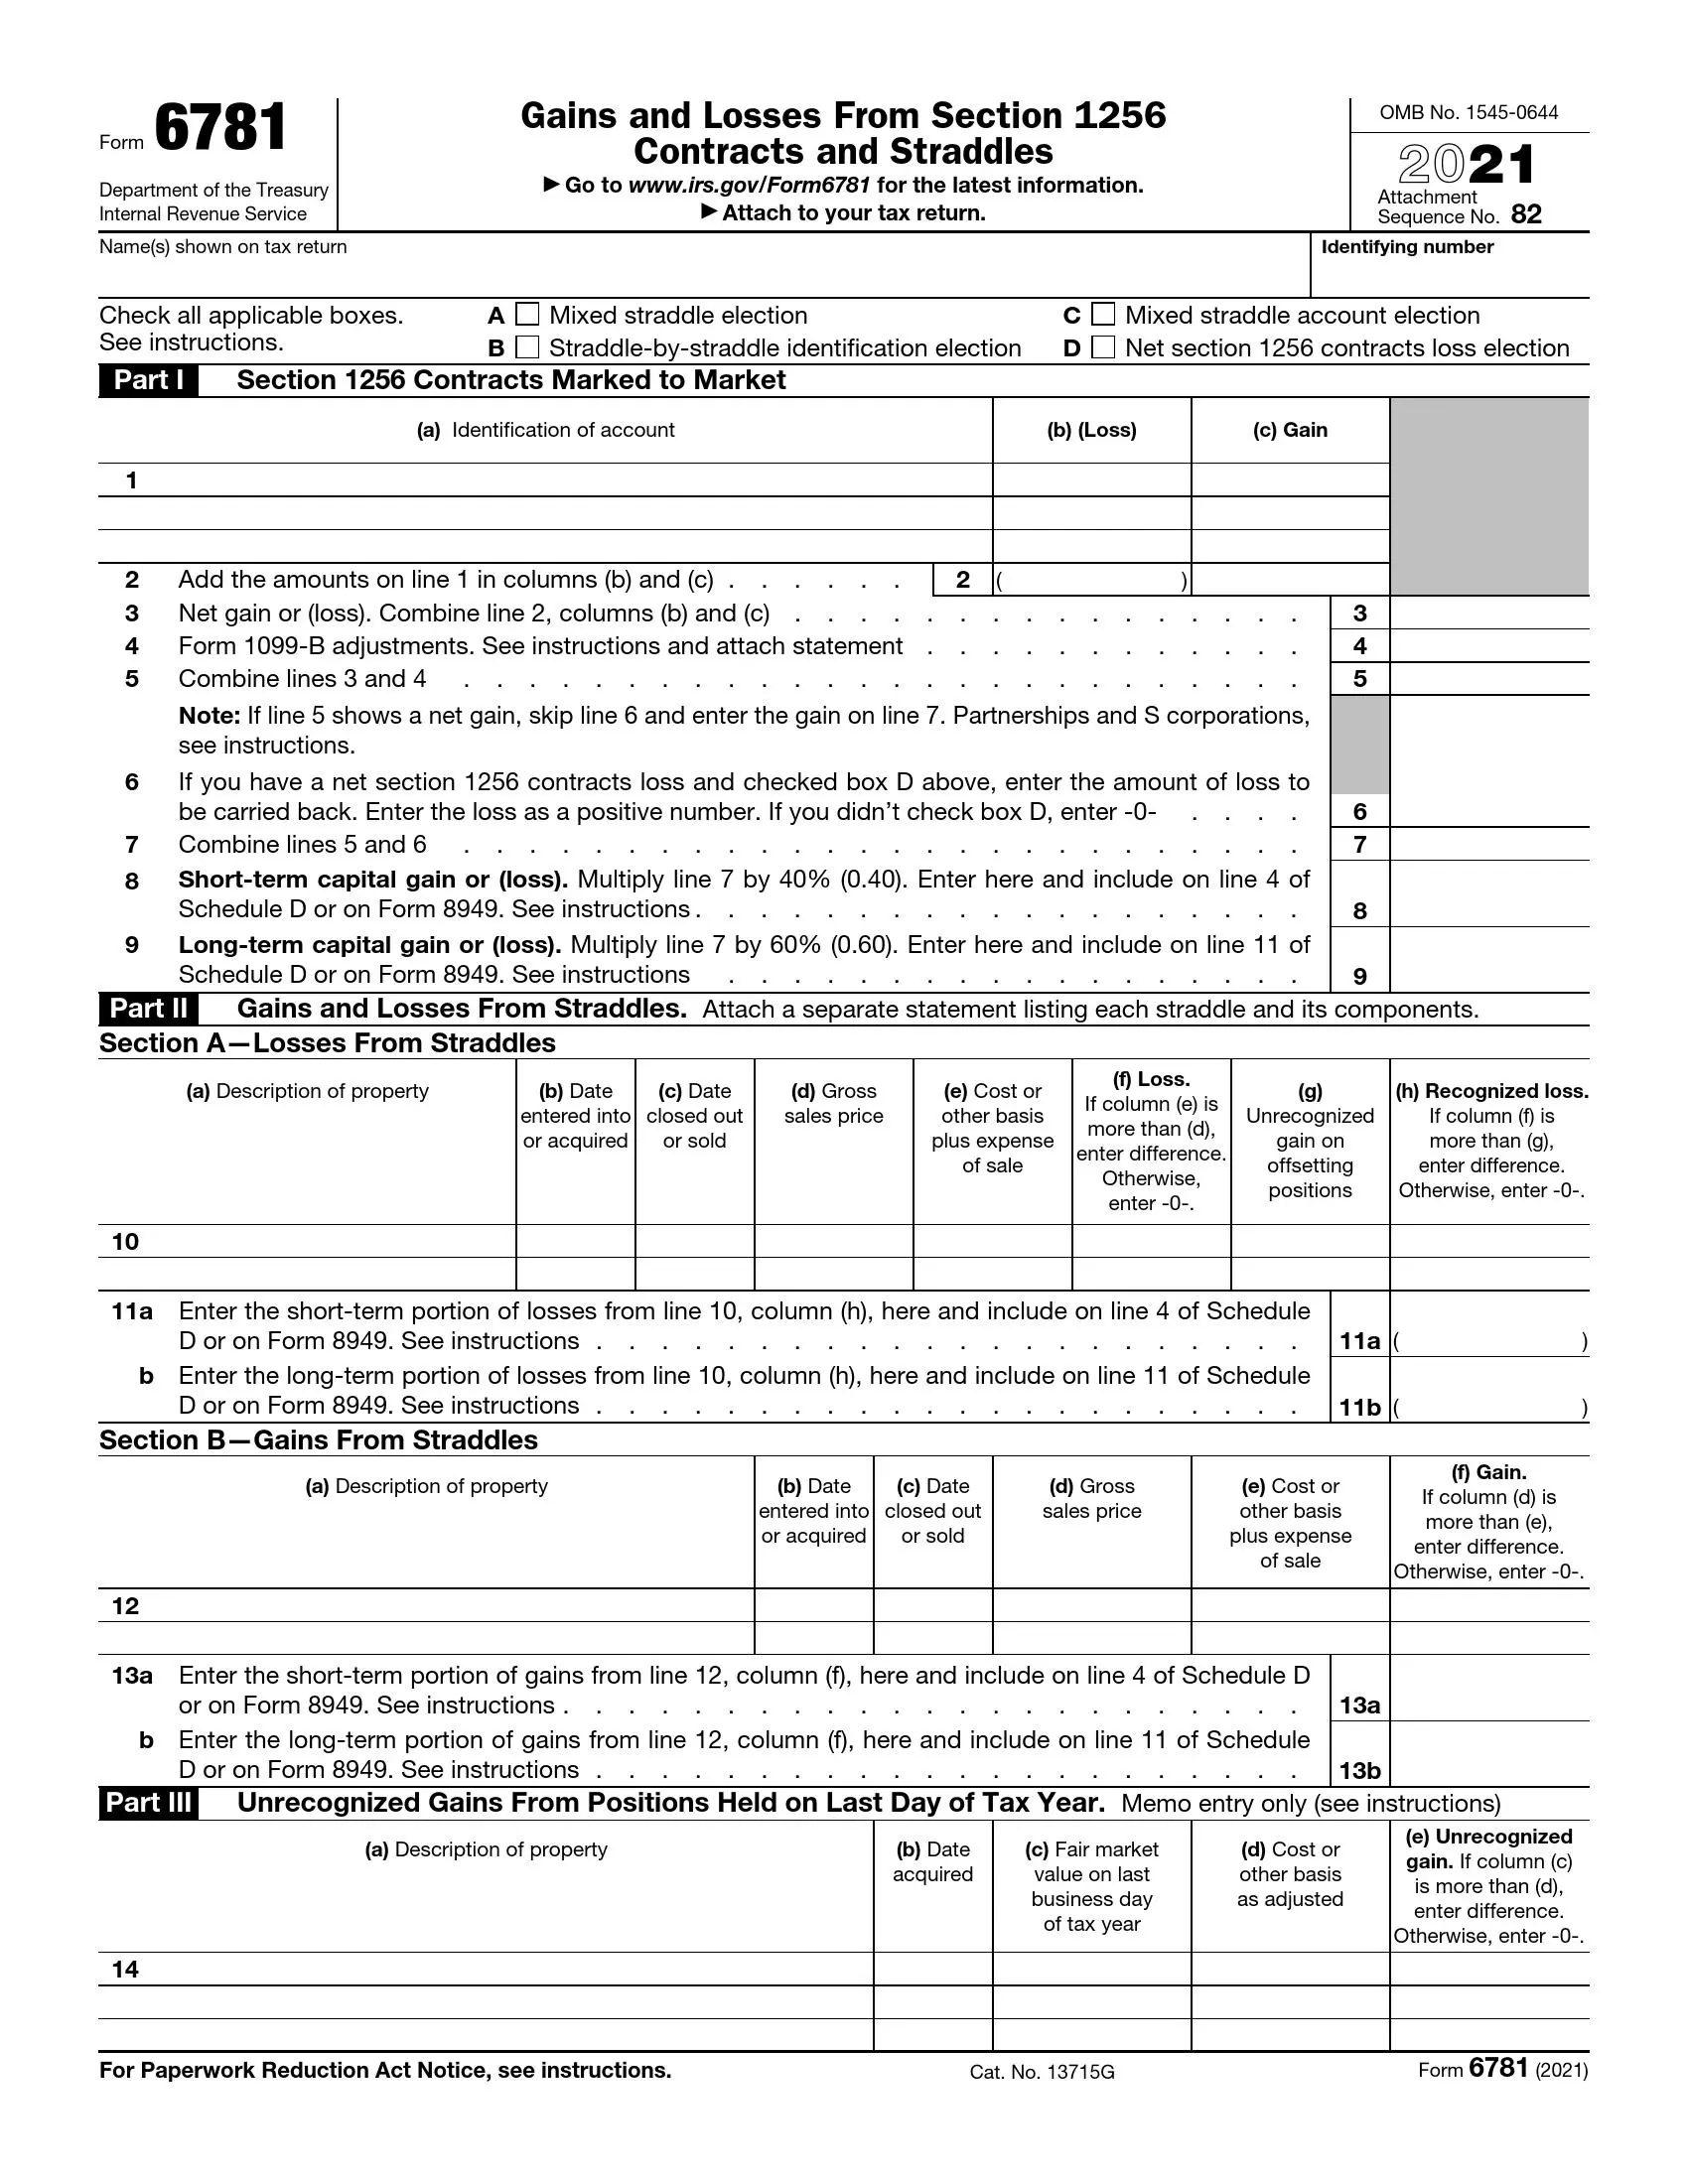 irs form 6781 2021 preview